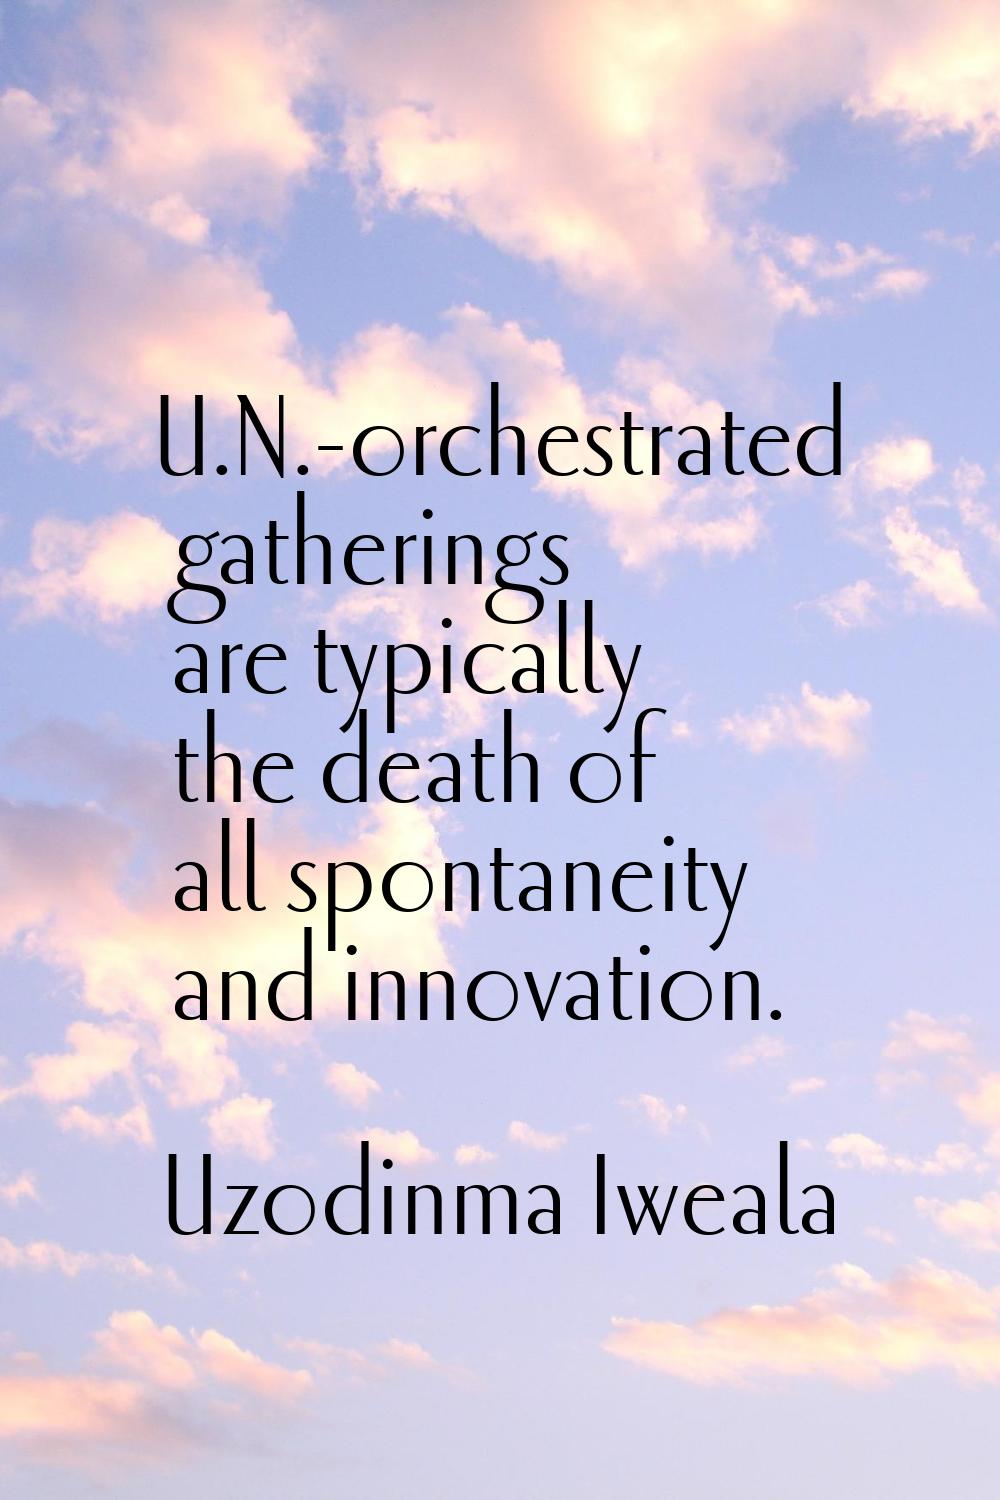 U.N.-orchestrated gatherings are typically the death of all spontaneity and innovation.